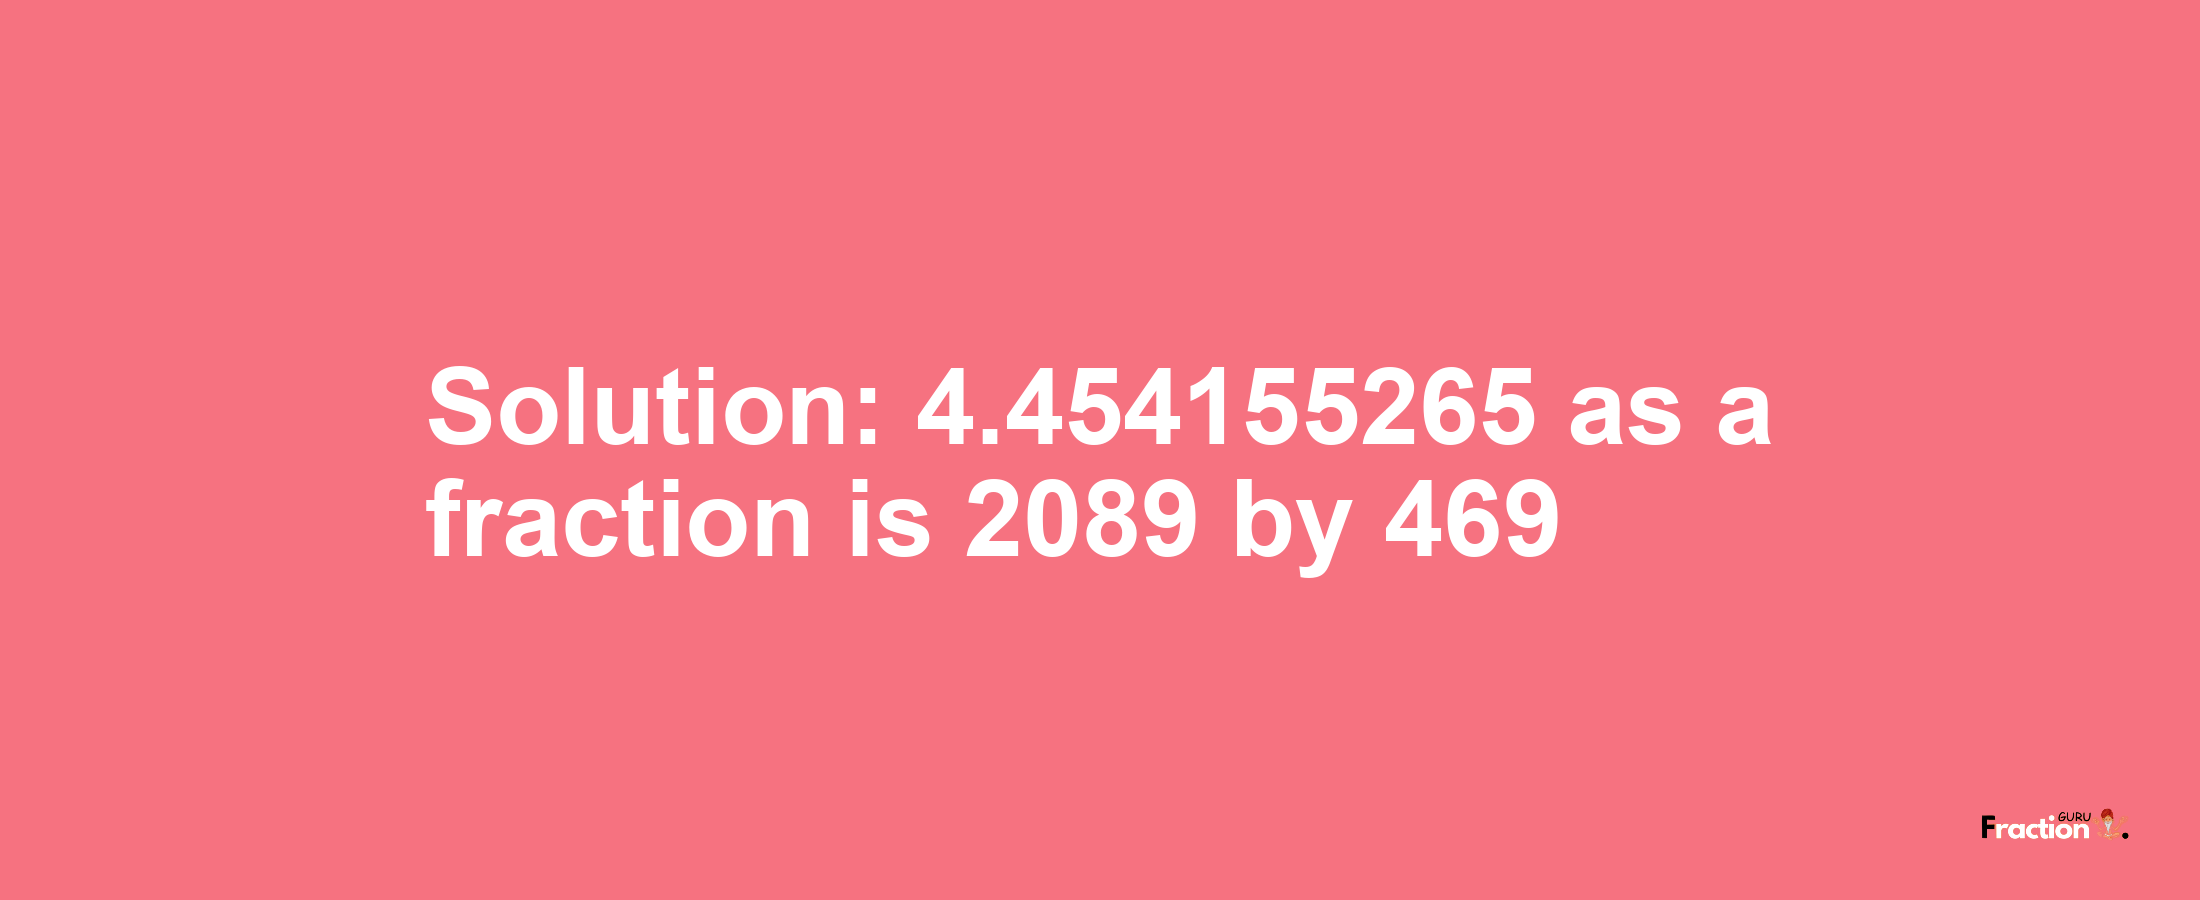 Solution:4.454155265 as a fraction is 2089/469